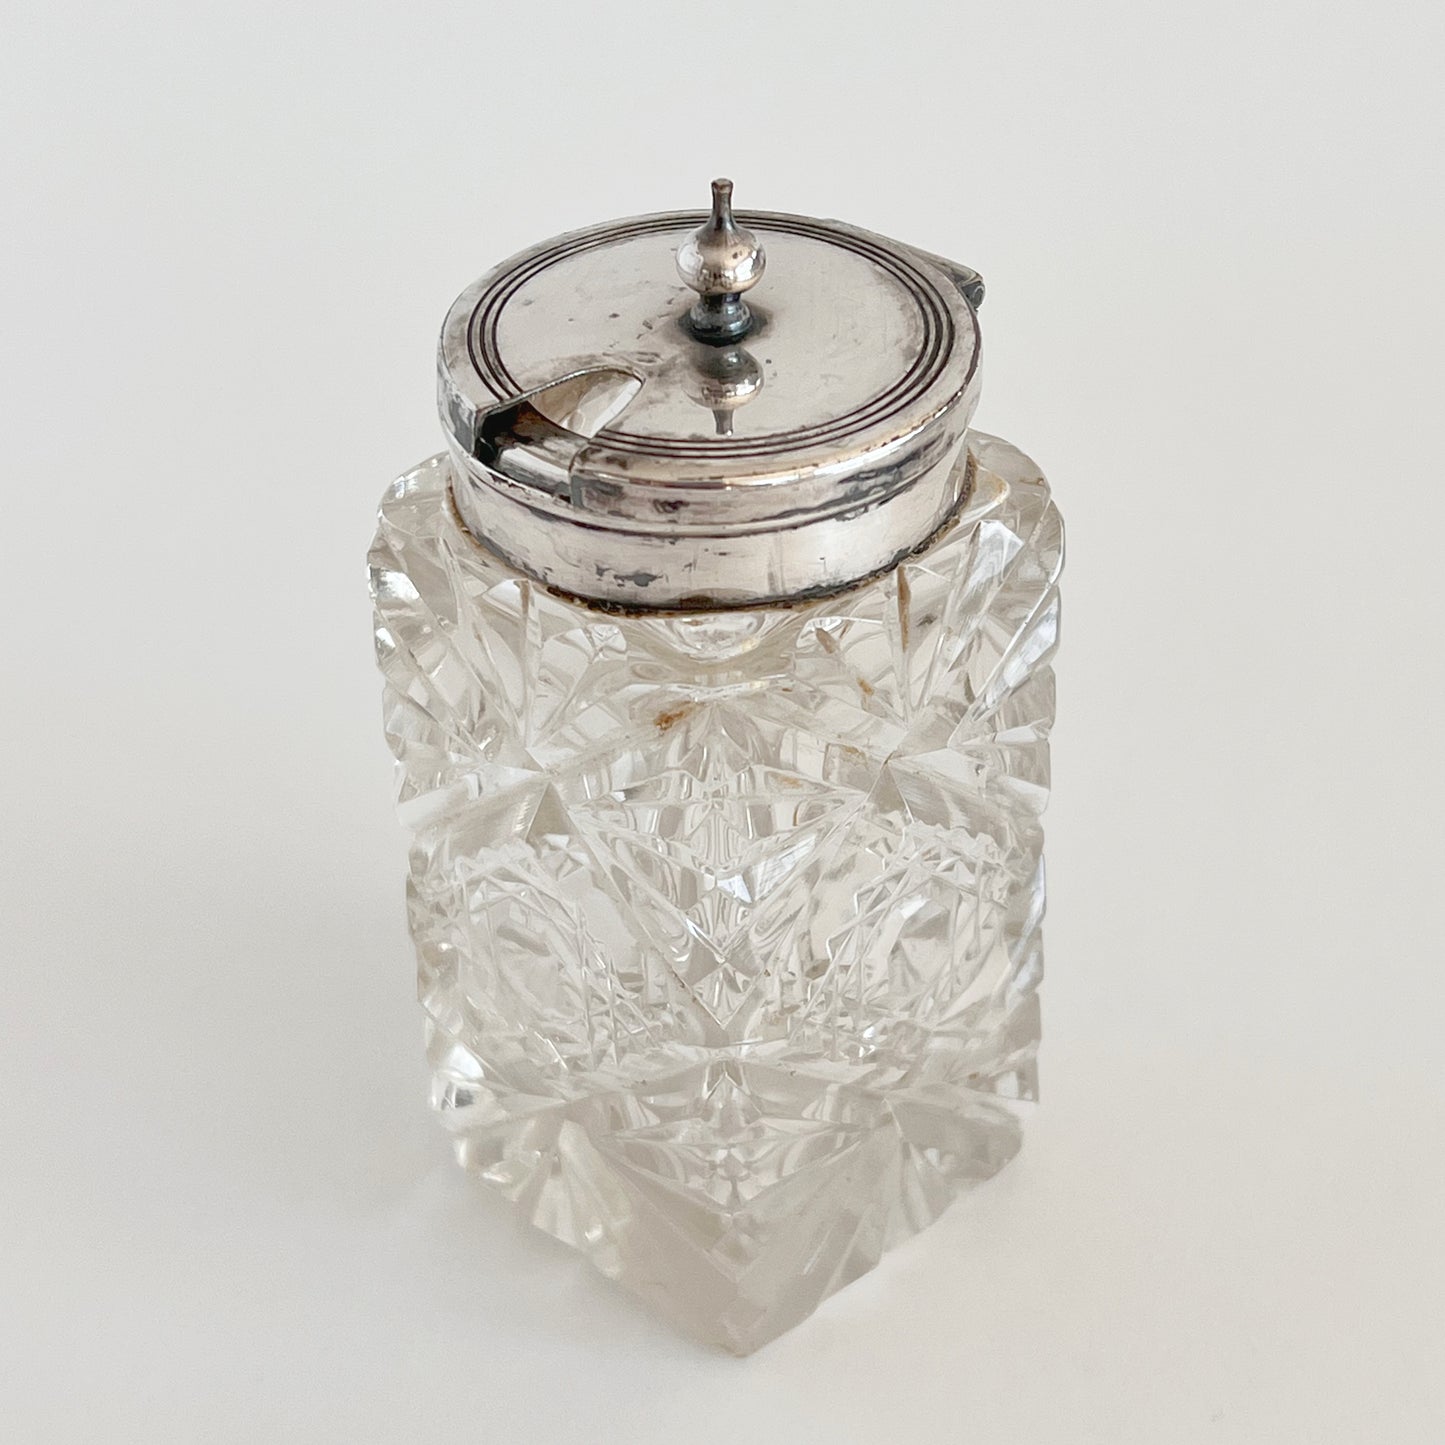 English antique glass mustard pot with silver-plated lid